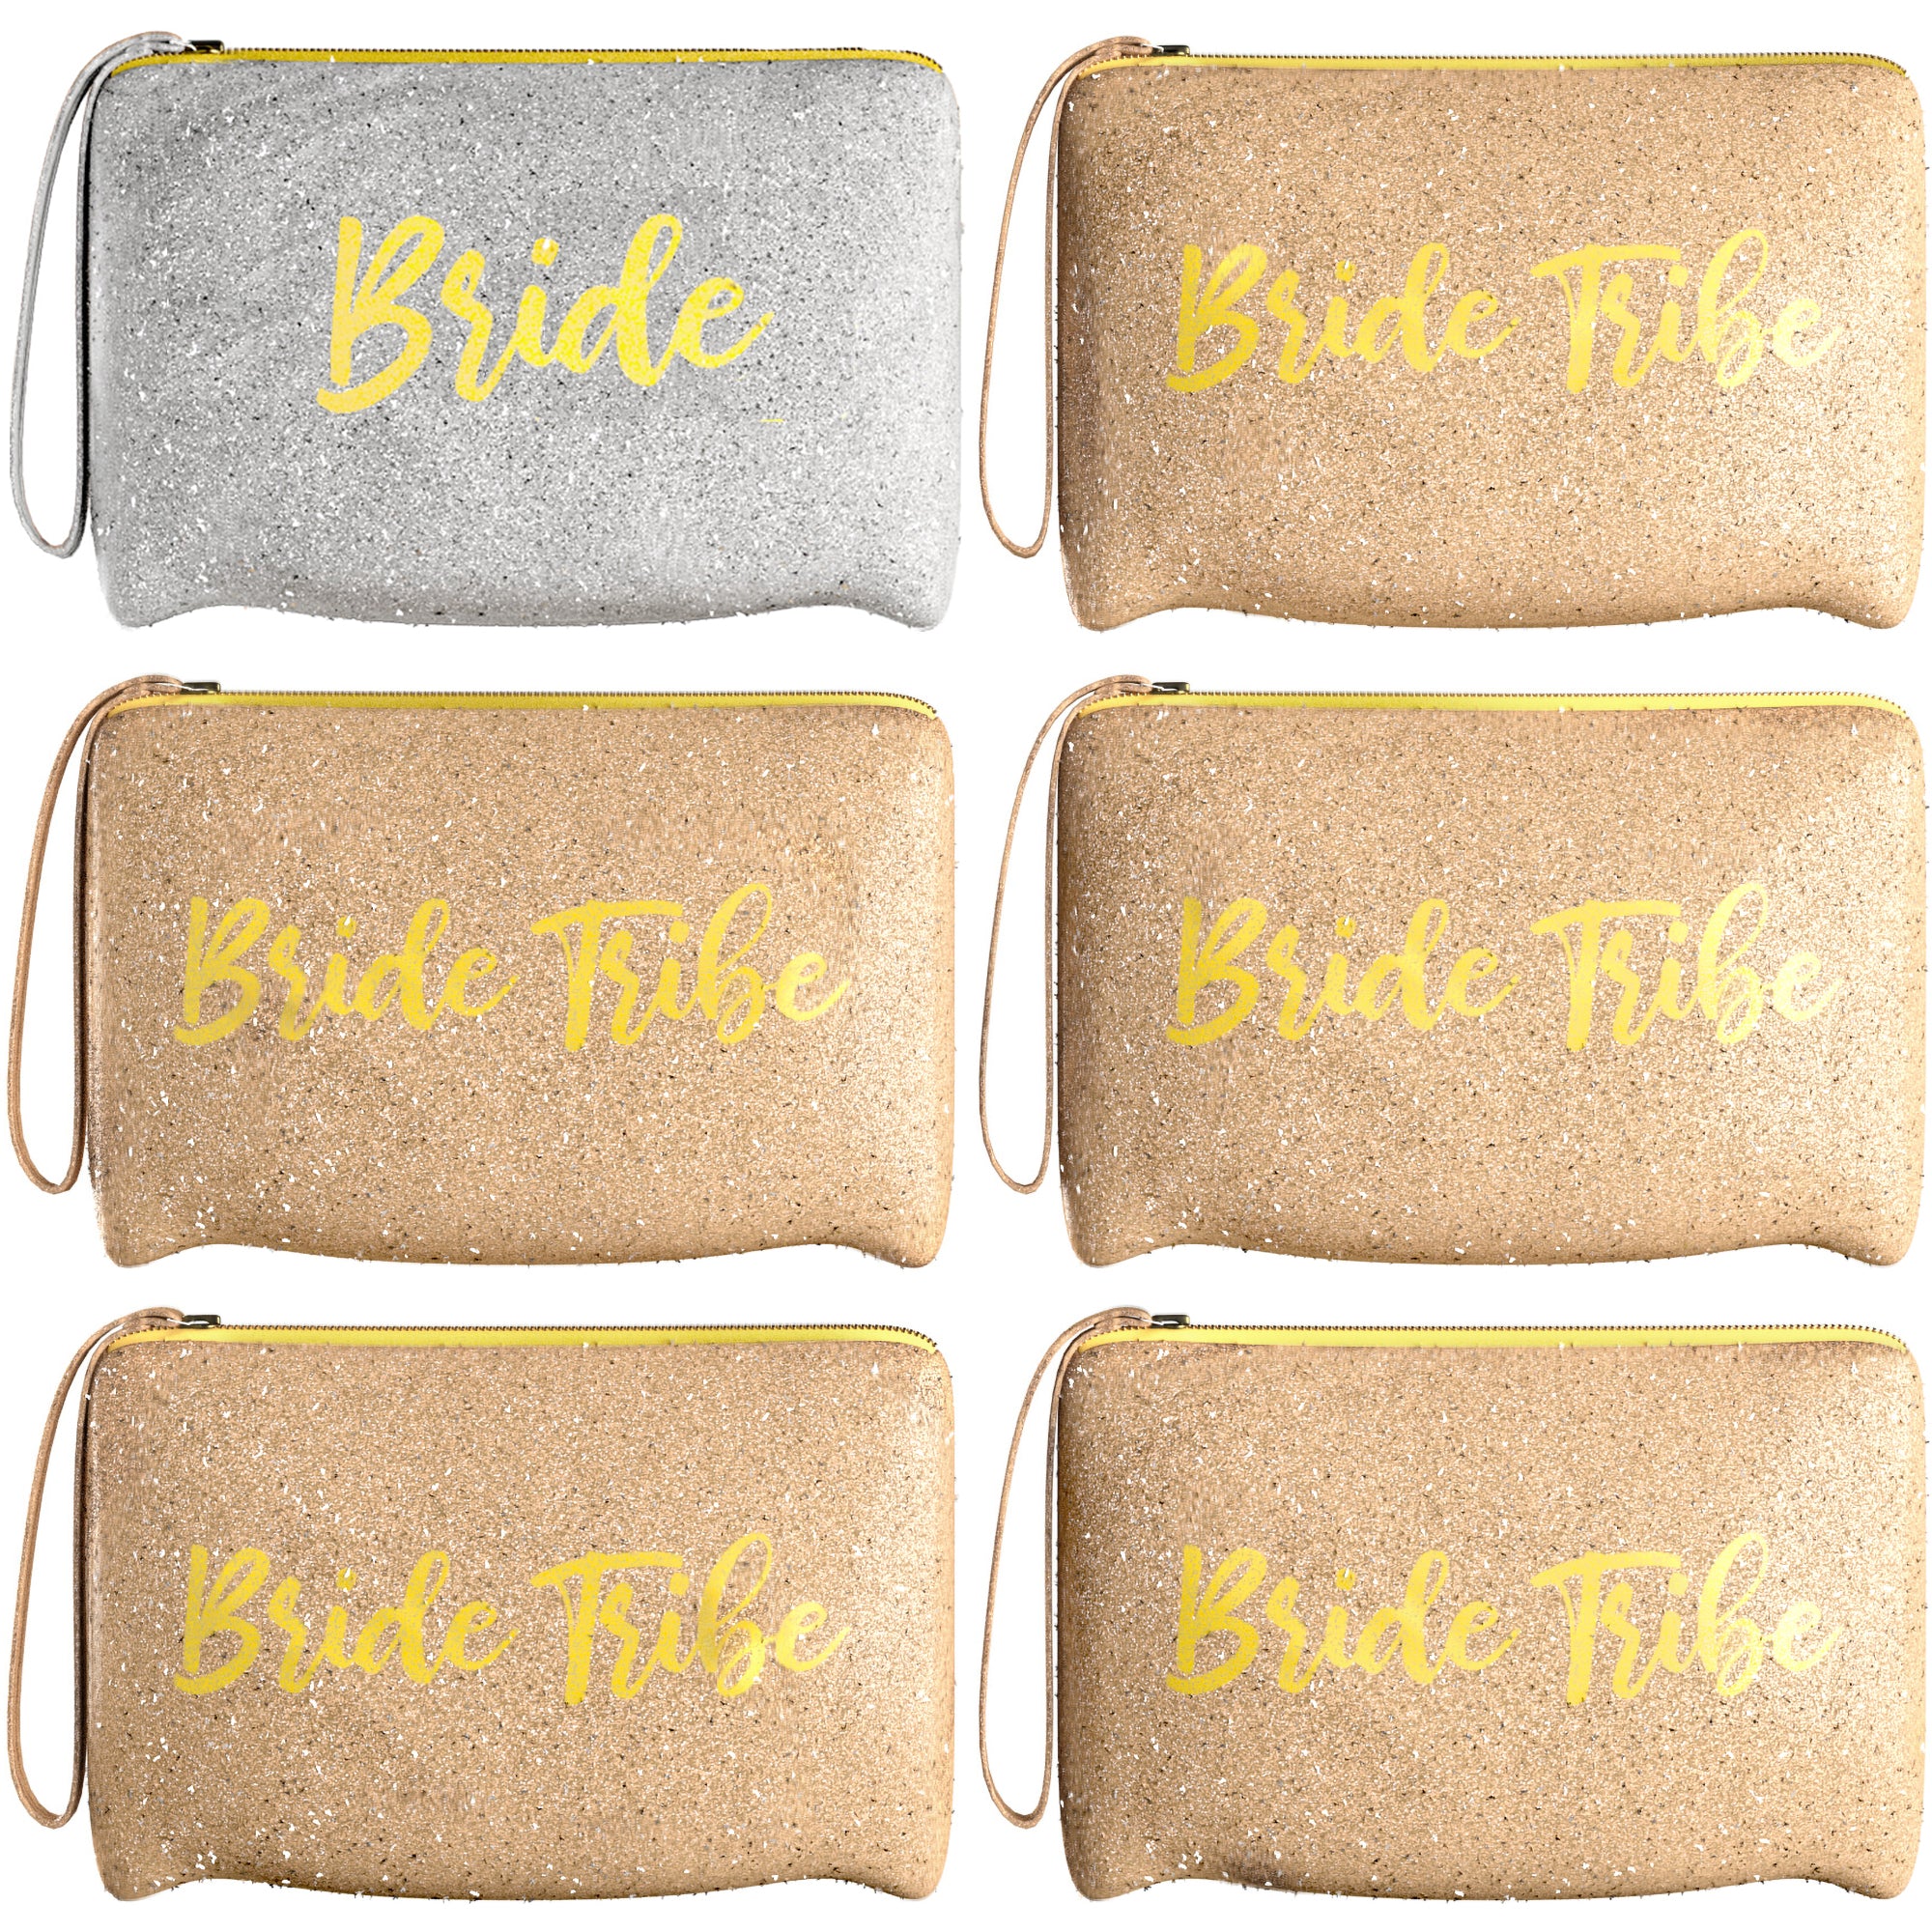 Bride Tribe Bridesmaid Canvas Cosmetic Makeup Clutch Rose Gold & Silver GLITTER | 6 Piece Set